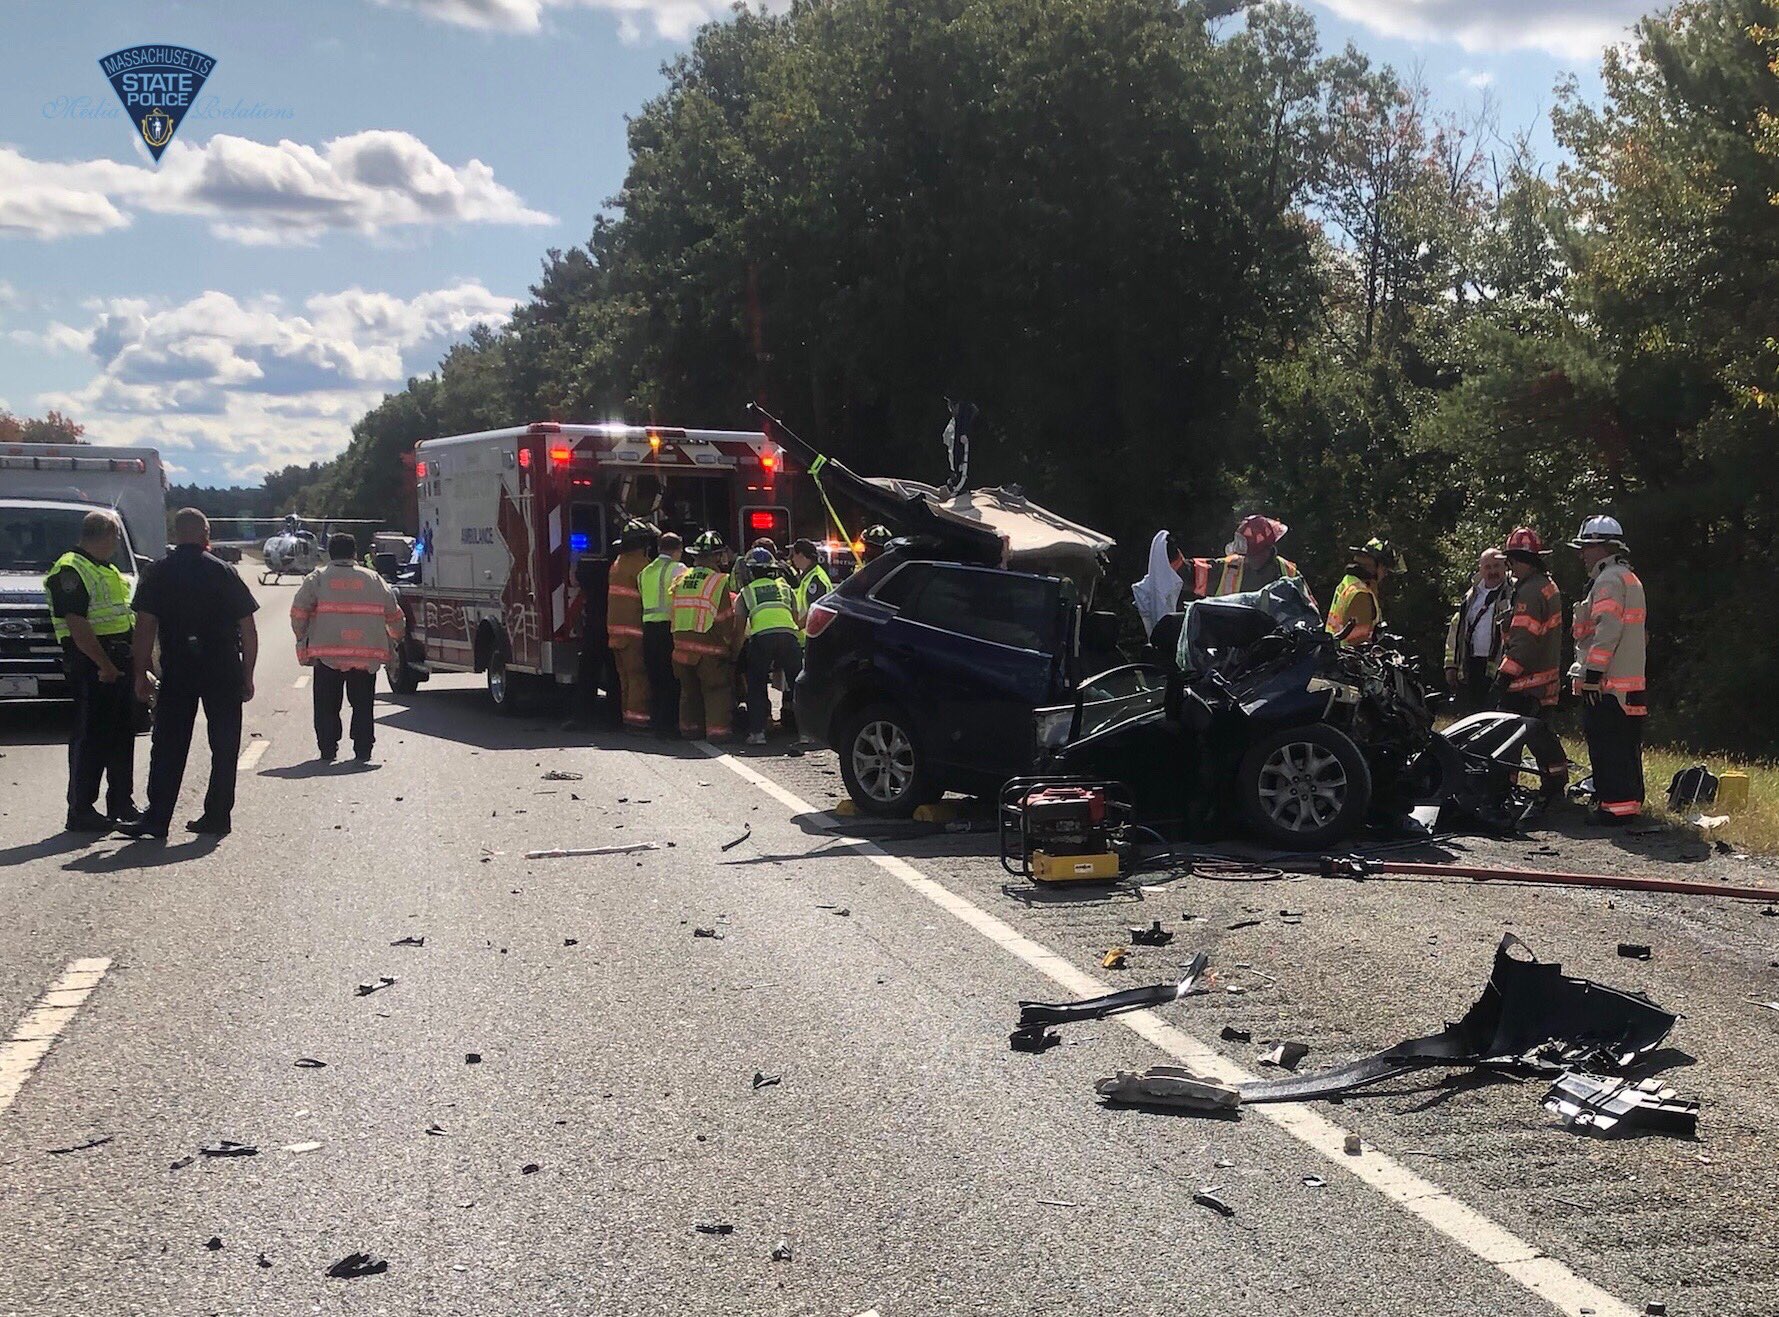 495 South Accident, Rollover Crash and Vehicle Fire Cause Traffic Chaos on I-495 South in Mansfield, Massachusetts